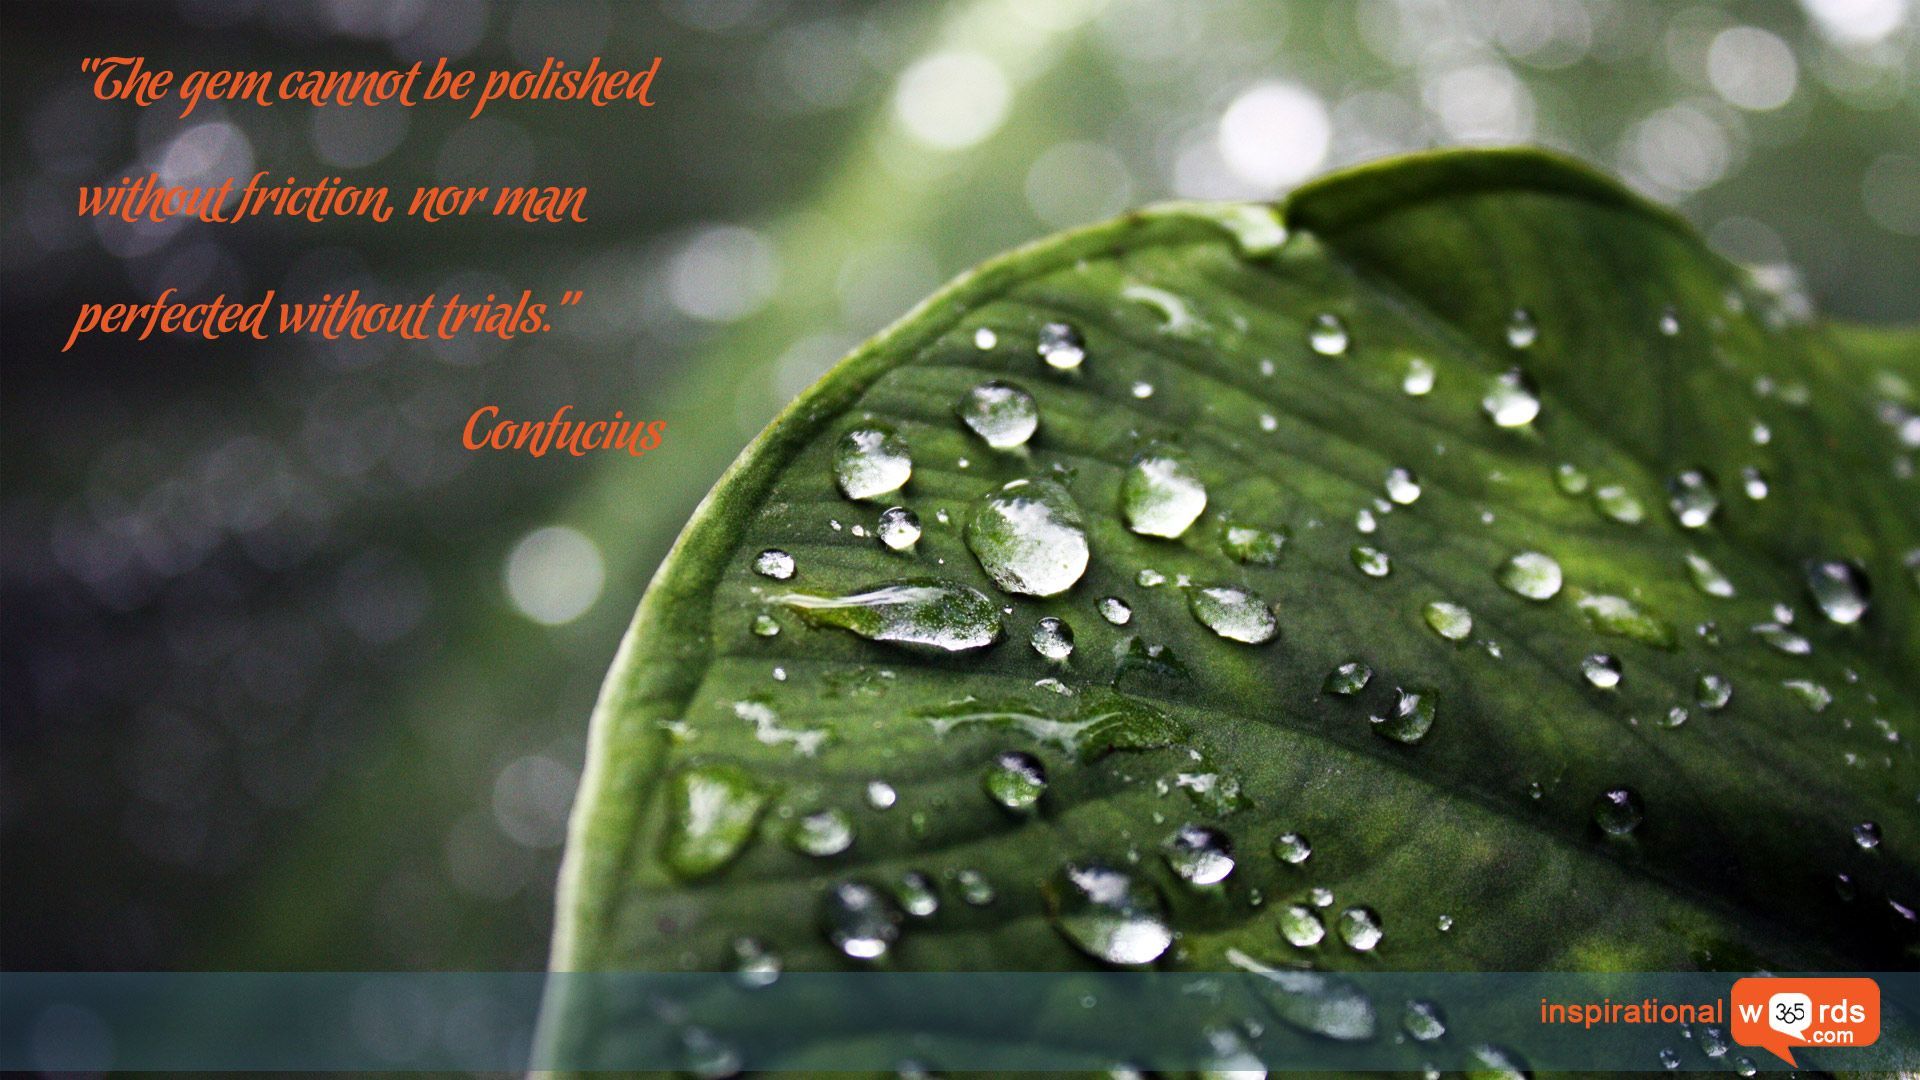 Inspirational Wallpaper Quote by Confucius “The gem cannot be polished without friction, nor man perfected without trials.”. Leaves, Nature wallpaper, Rain drops